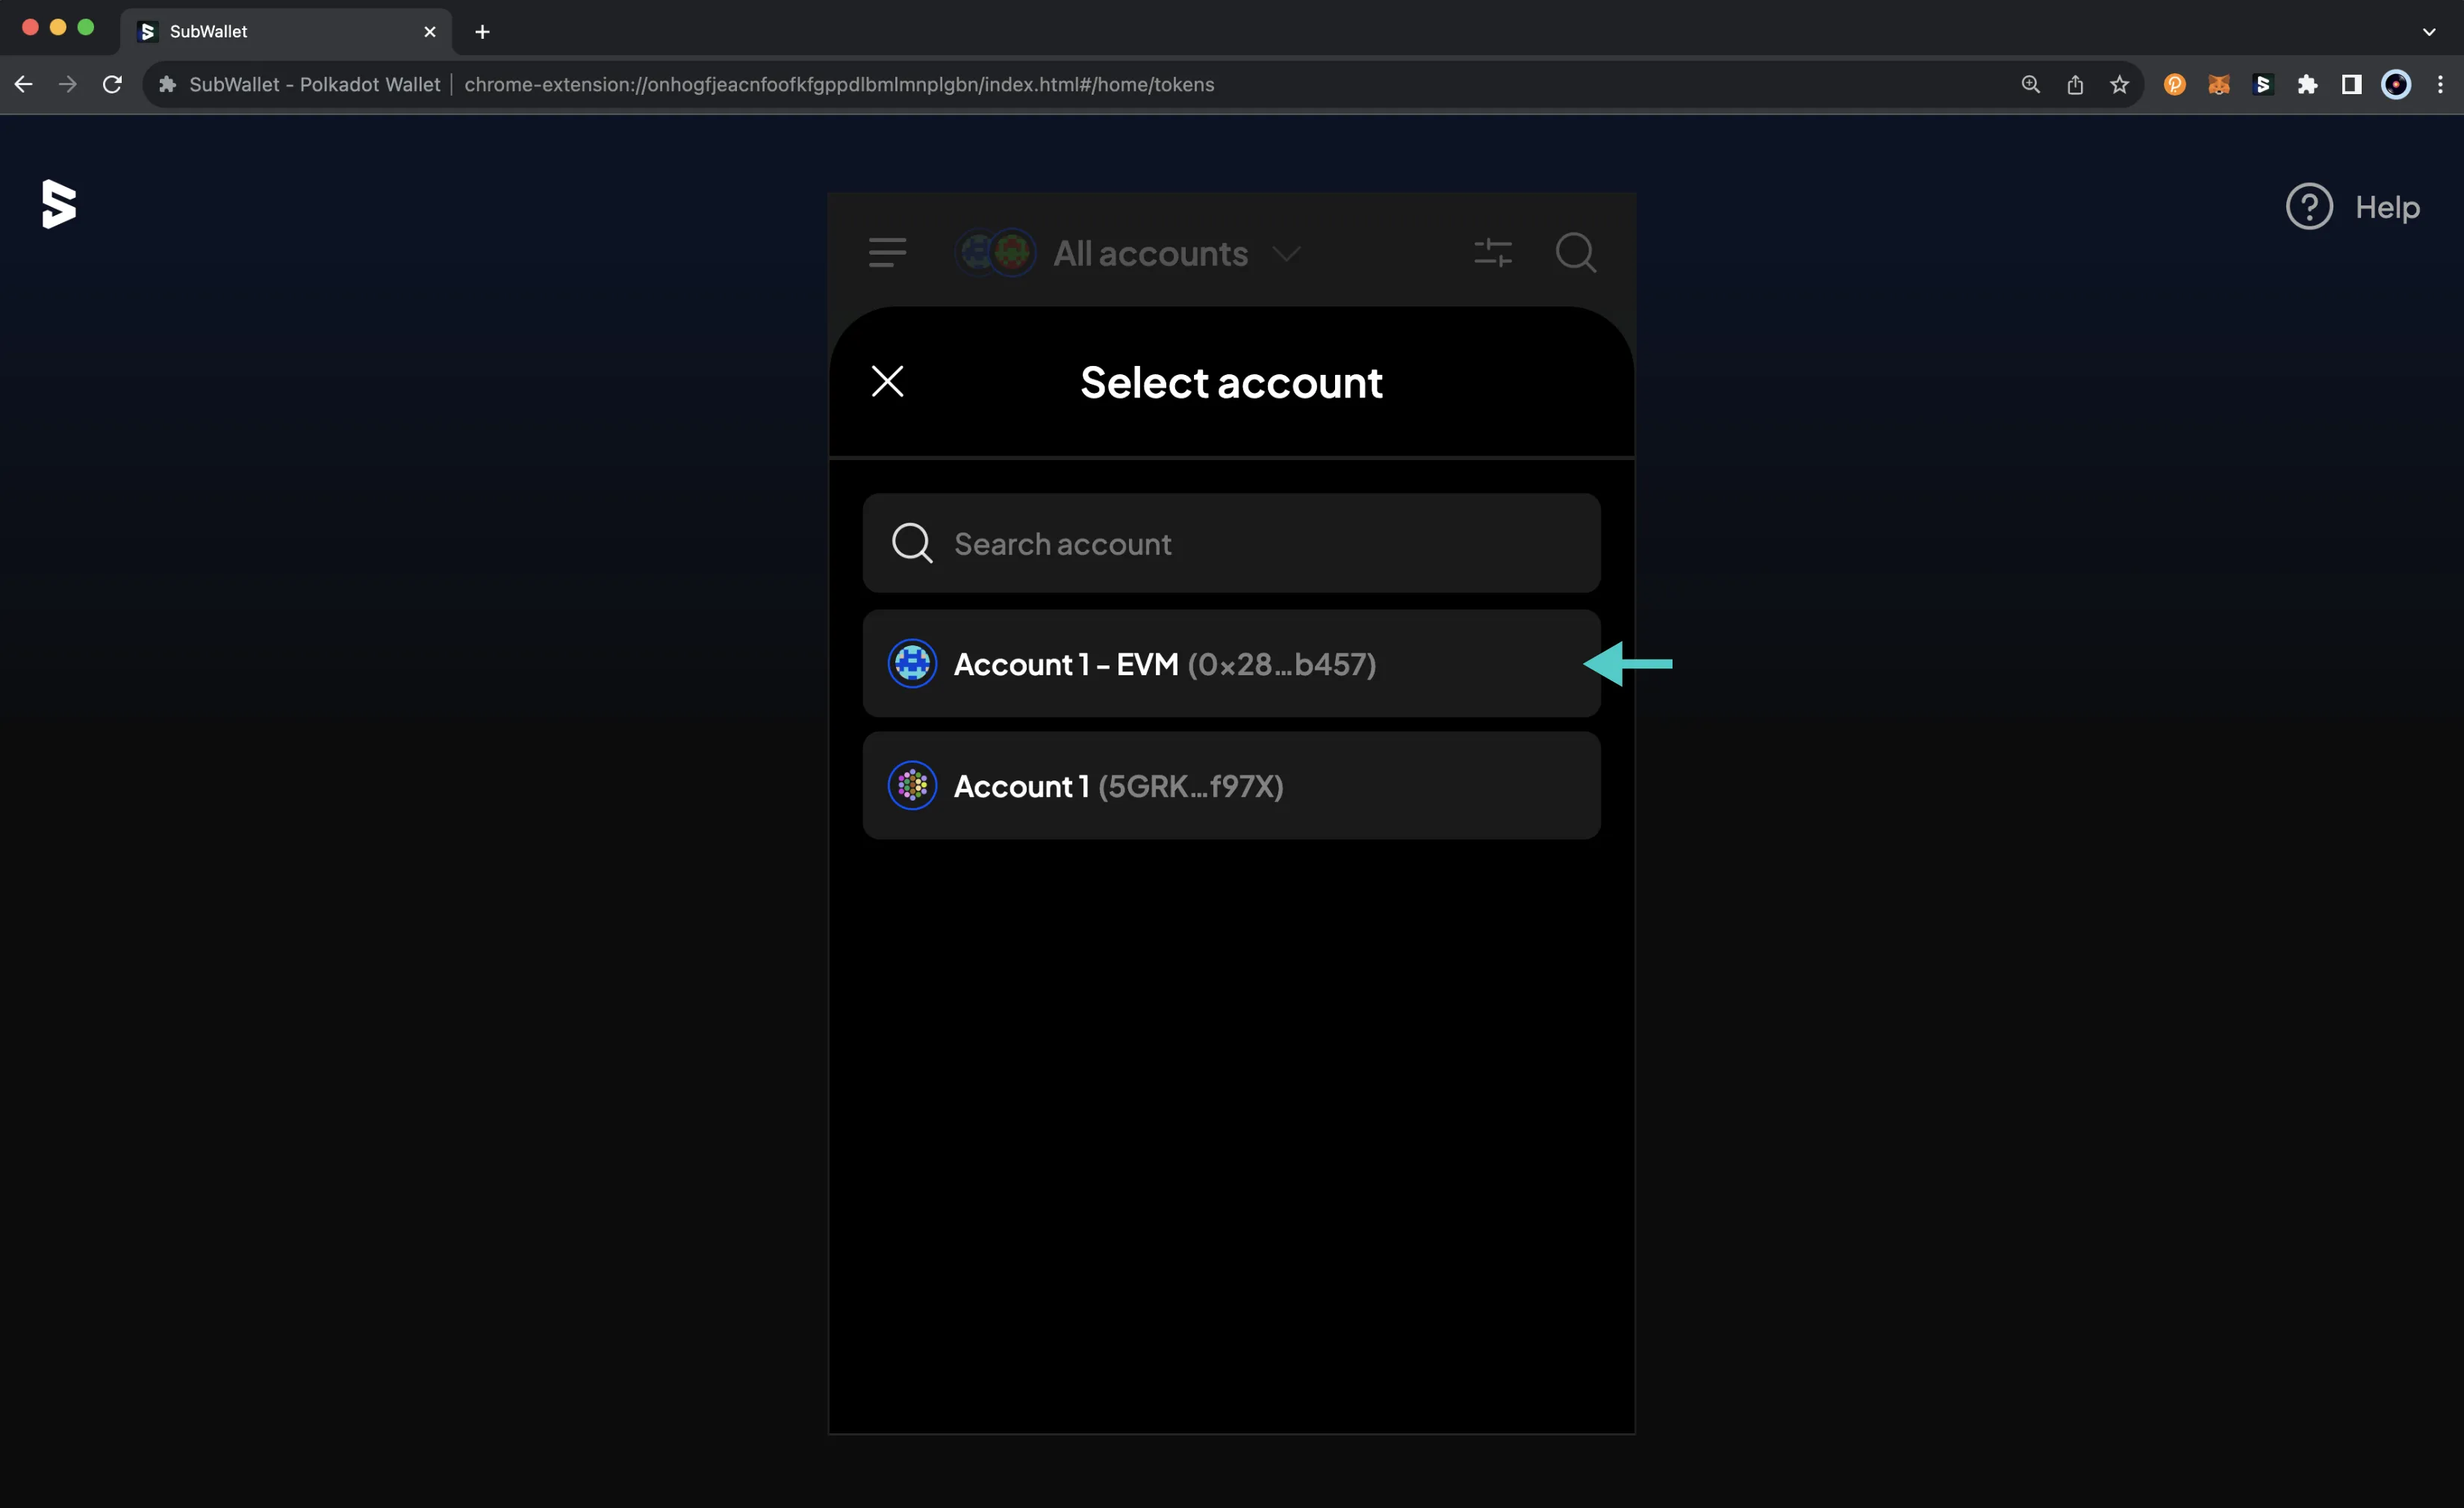 Select an account to receive tokens on the SubWallet browser extension.